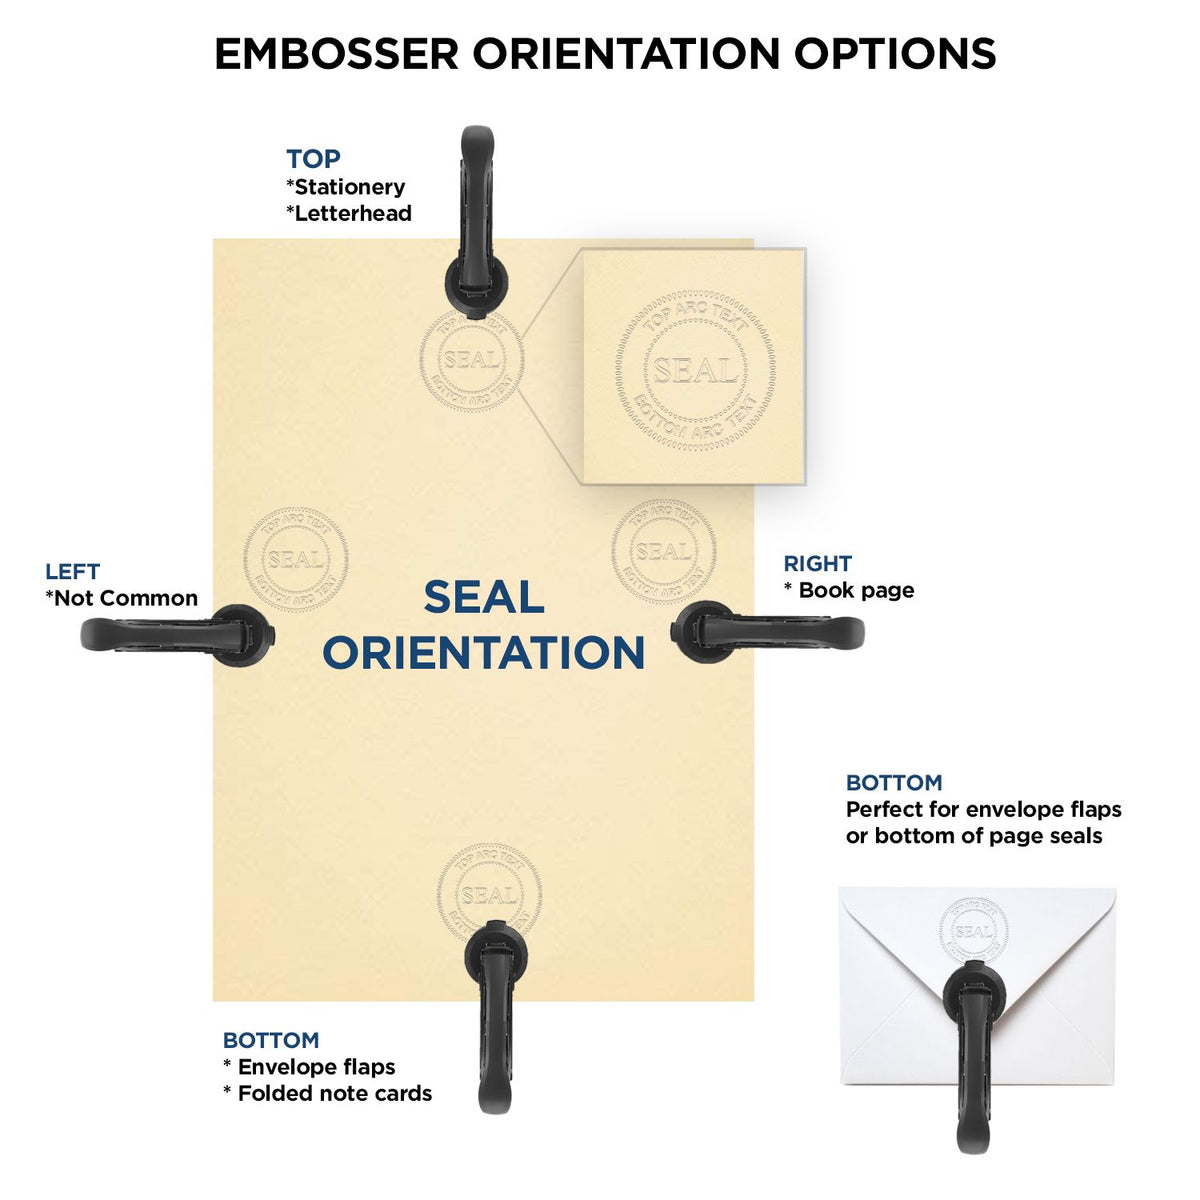 An infographic for the State of New Hampshire Extended Long Reach Engineer Seal showing embosser orientation, this is showing examples of a top, bottom, right and left insert.